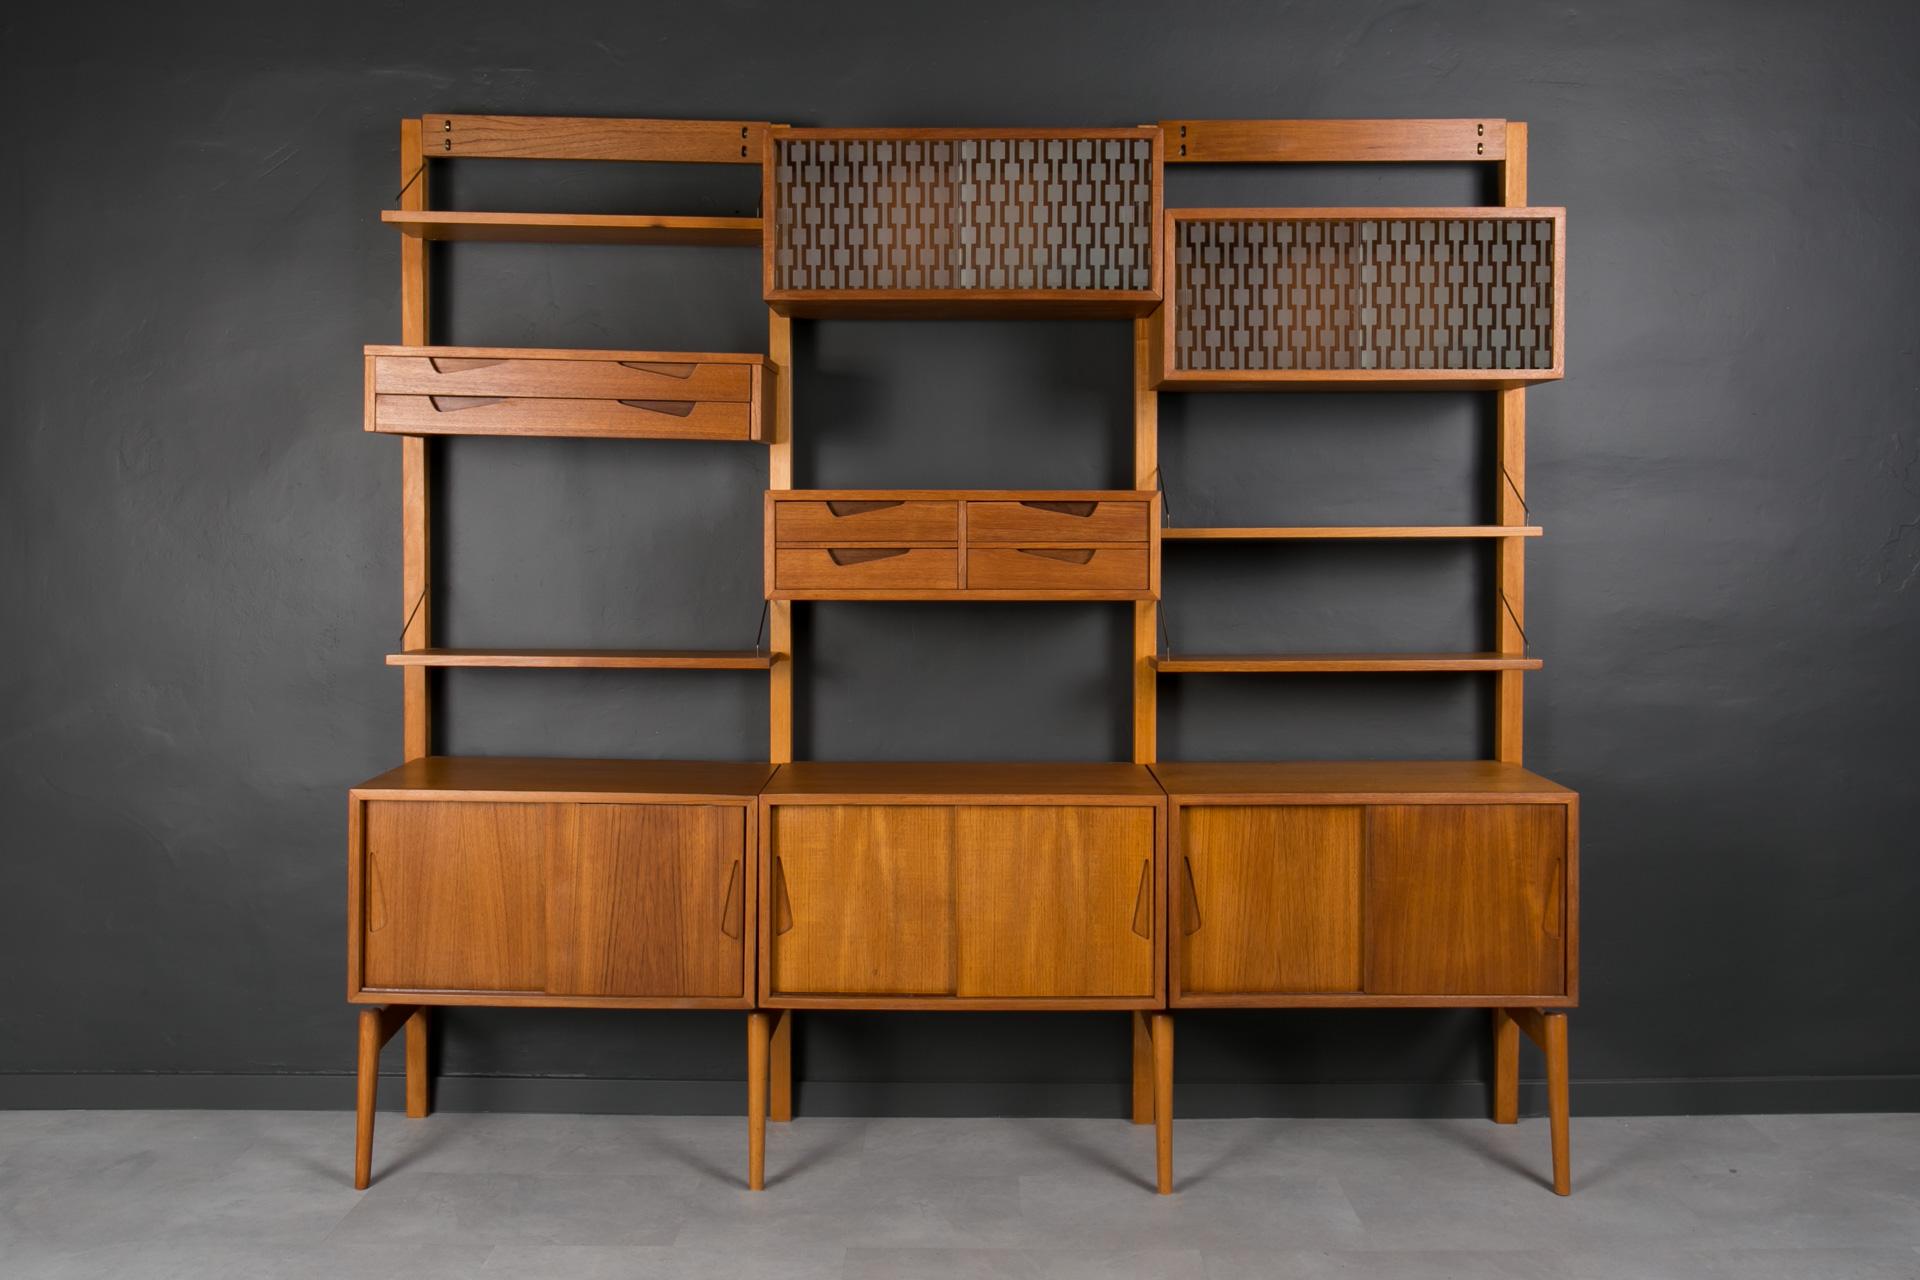 This is a smartly designed teak modular wall unit produced in Norway around 1960s by Brodrene Jatog Mobelfabrik, most probably designed by Kjell Riise. It is made of teak wood and preserved in very good original condition, the wooden surface is